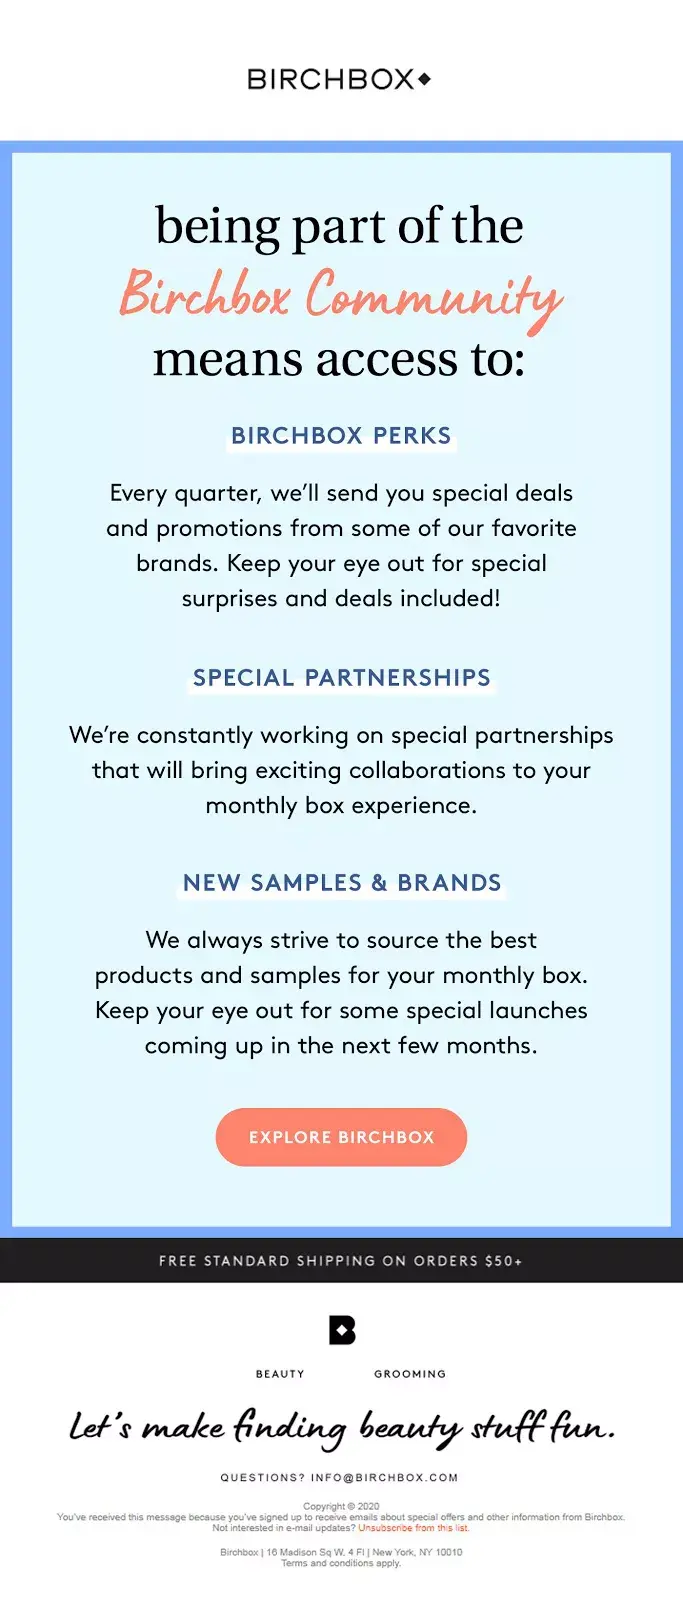 birchbox perks welcome email series